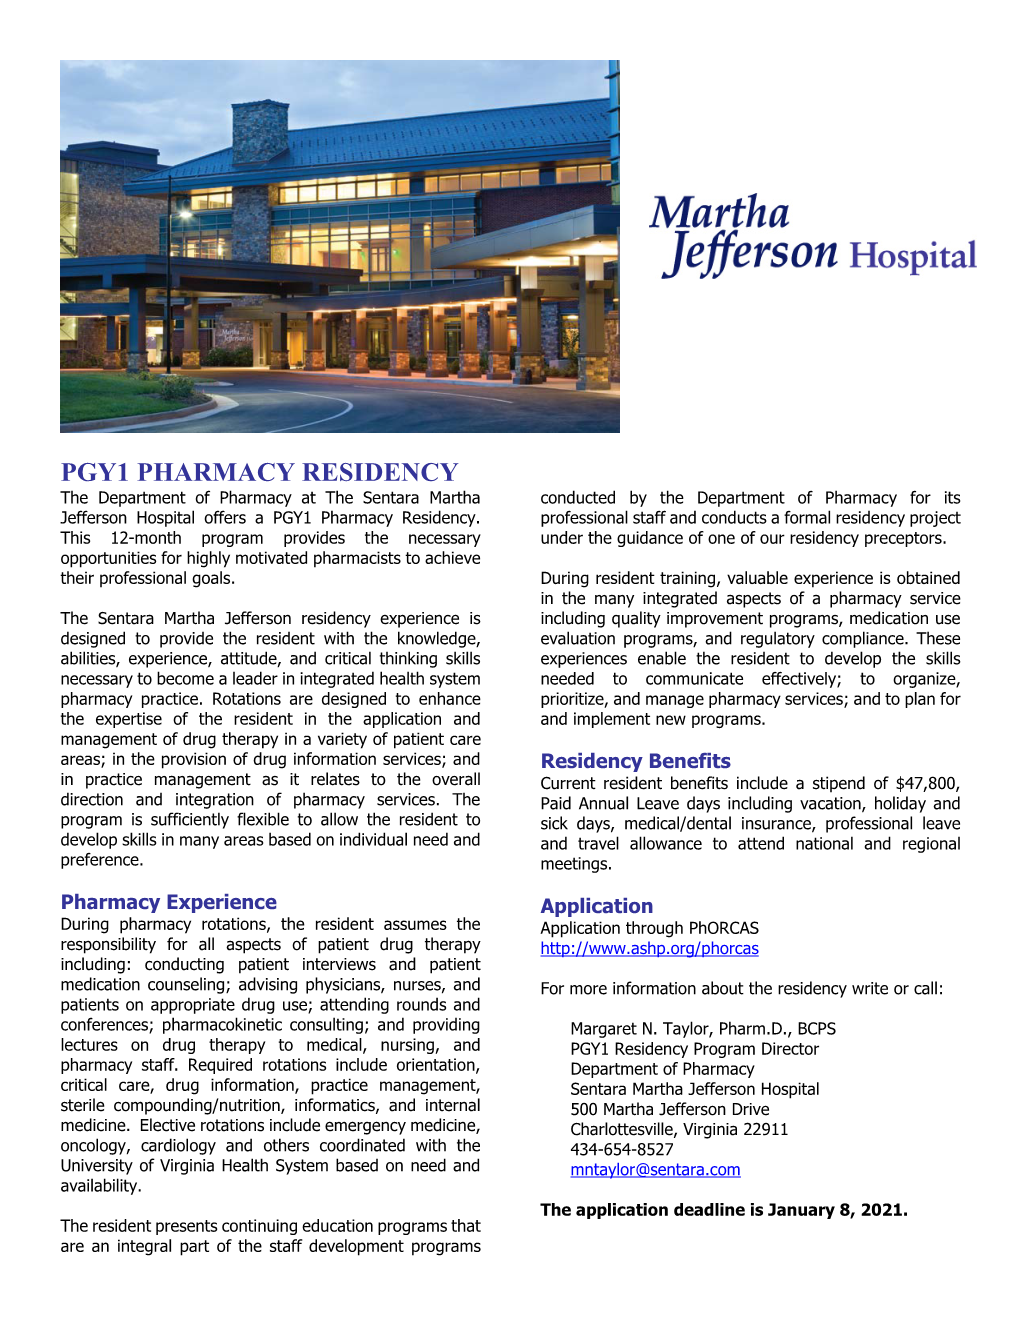 Download the 2020 PGY1 Pharmacy Residency Brochure